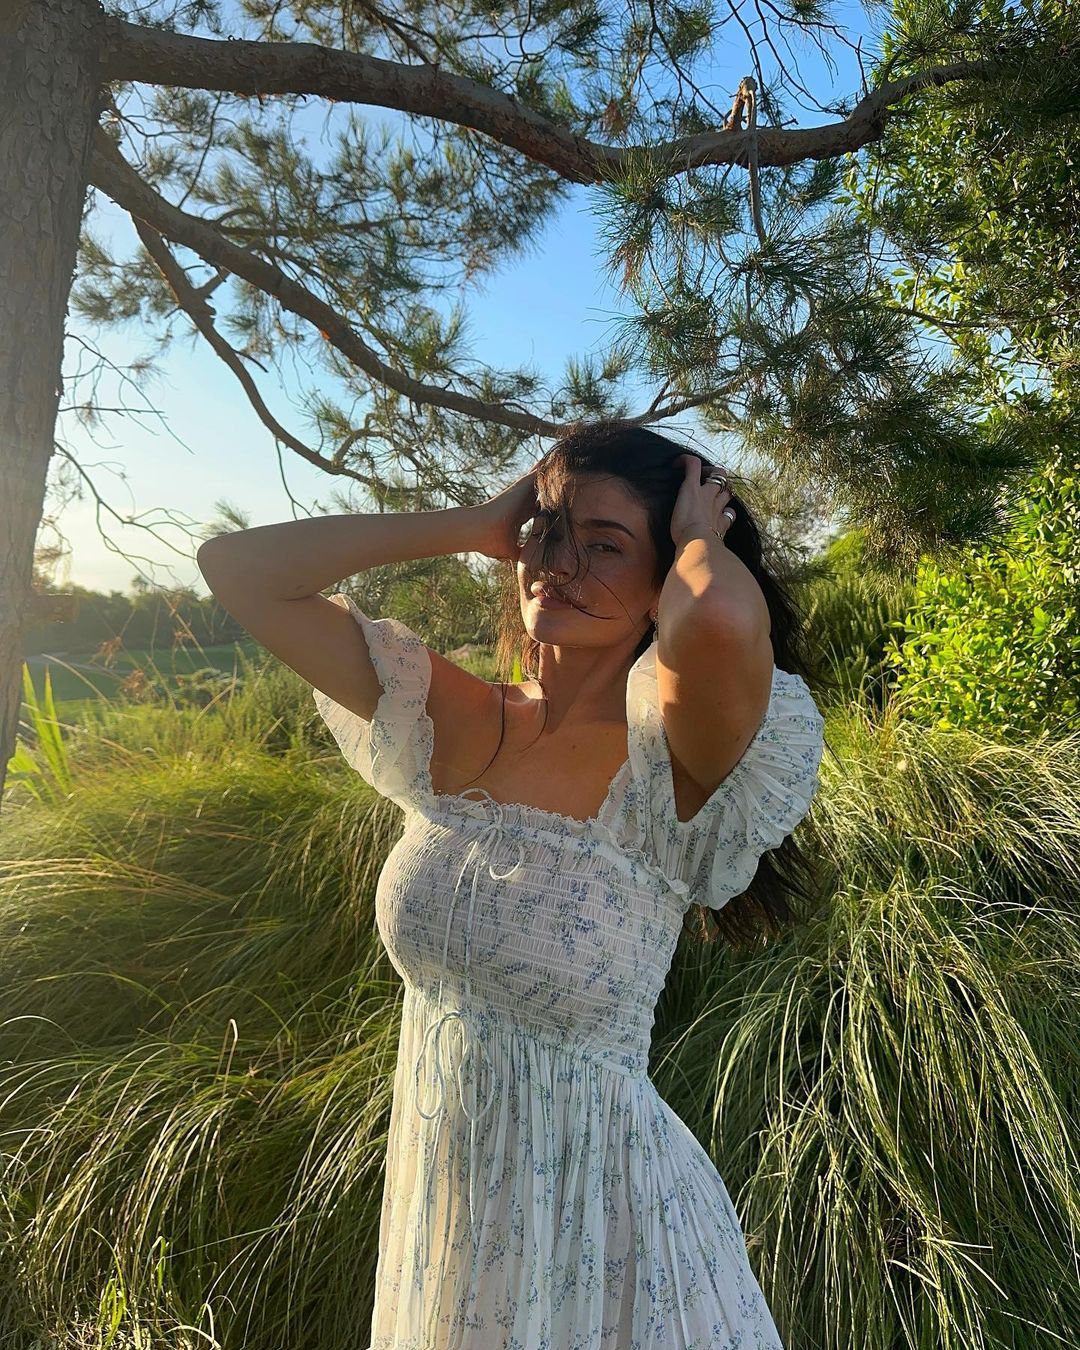 Kylie Jenner Takes On Cottagecore in a Dreamy Off-the-Shoulder Dress